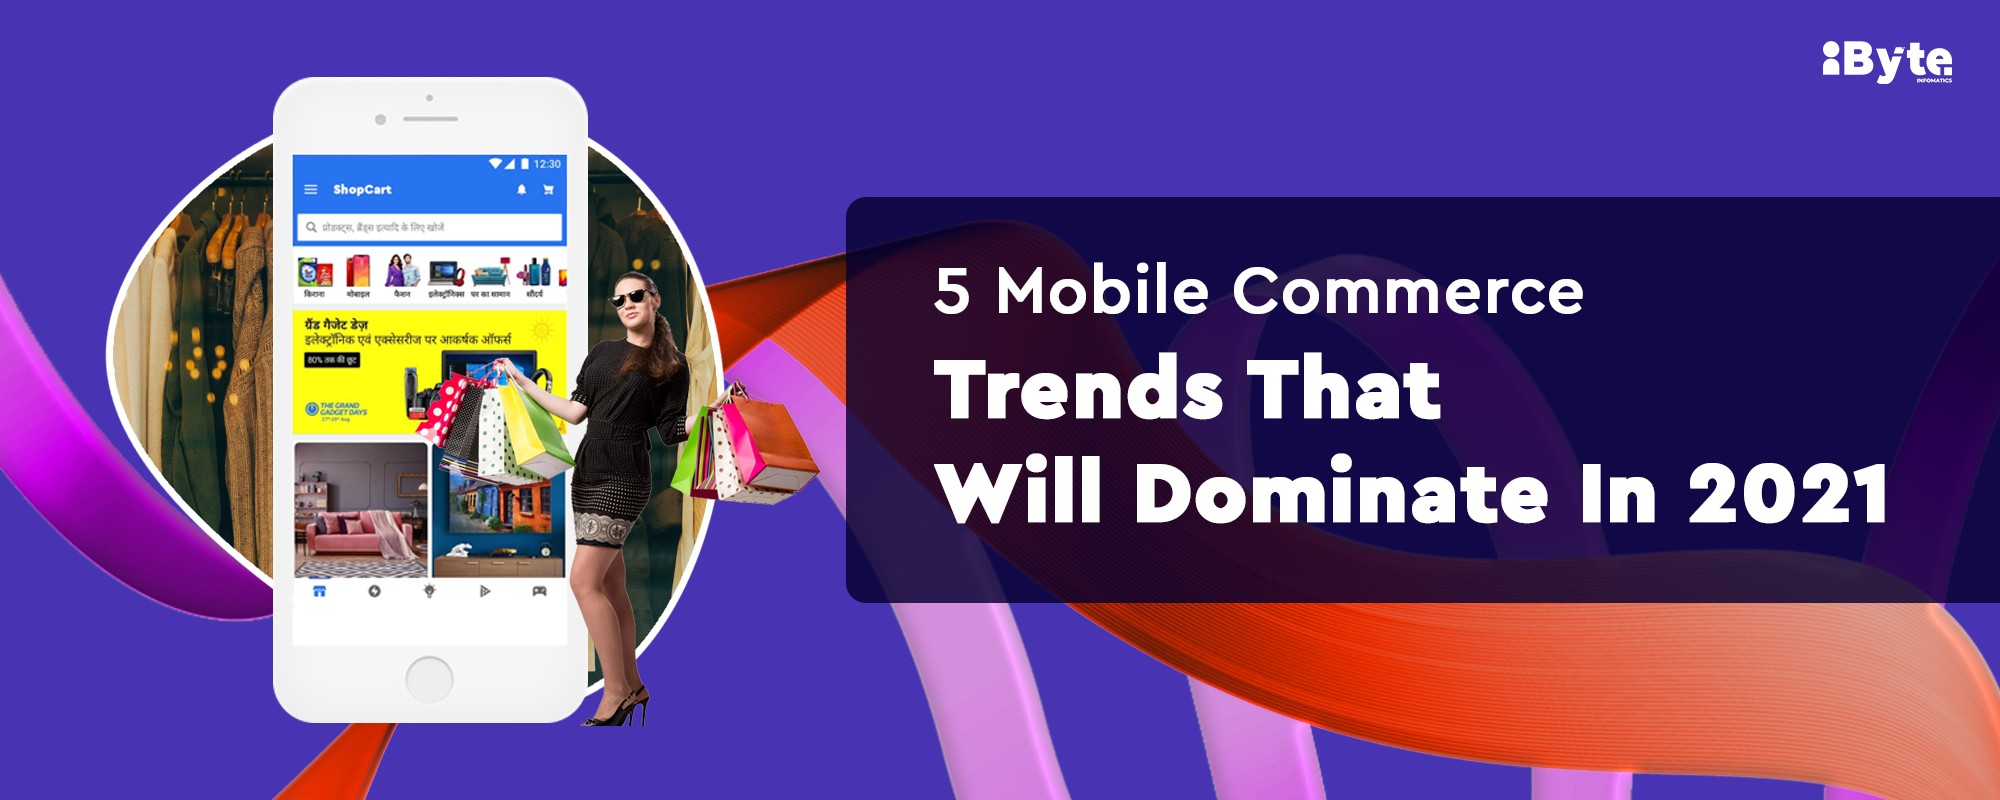 5 Mobile Commerce Trends That Will Dominate In 2021